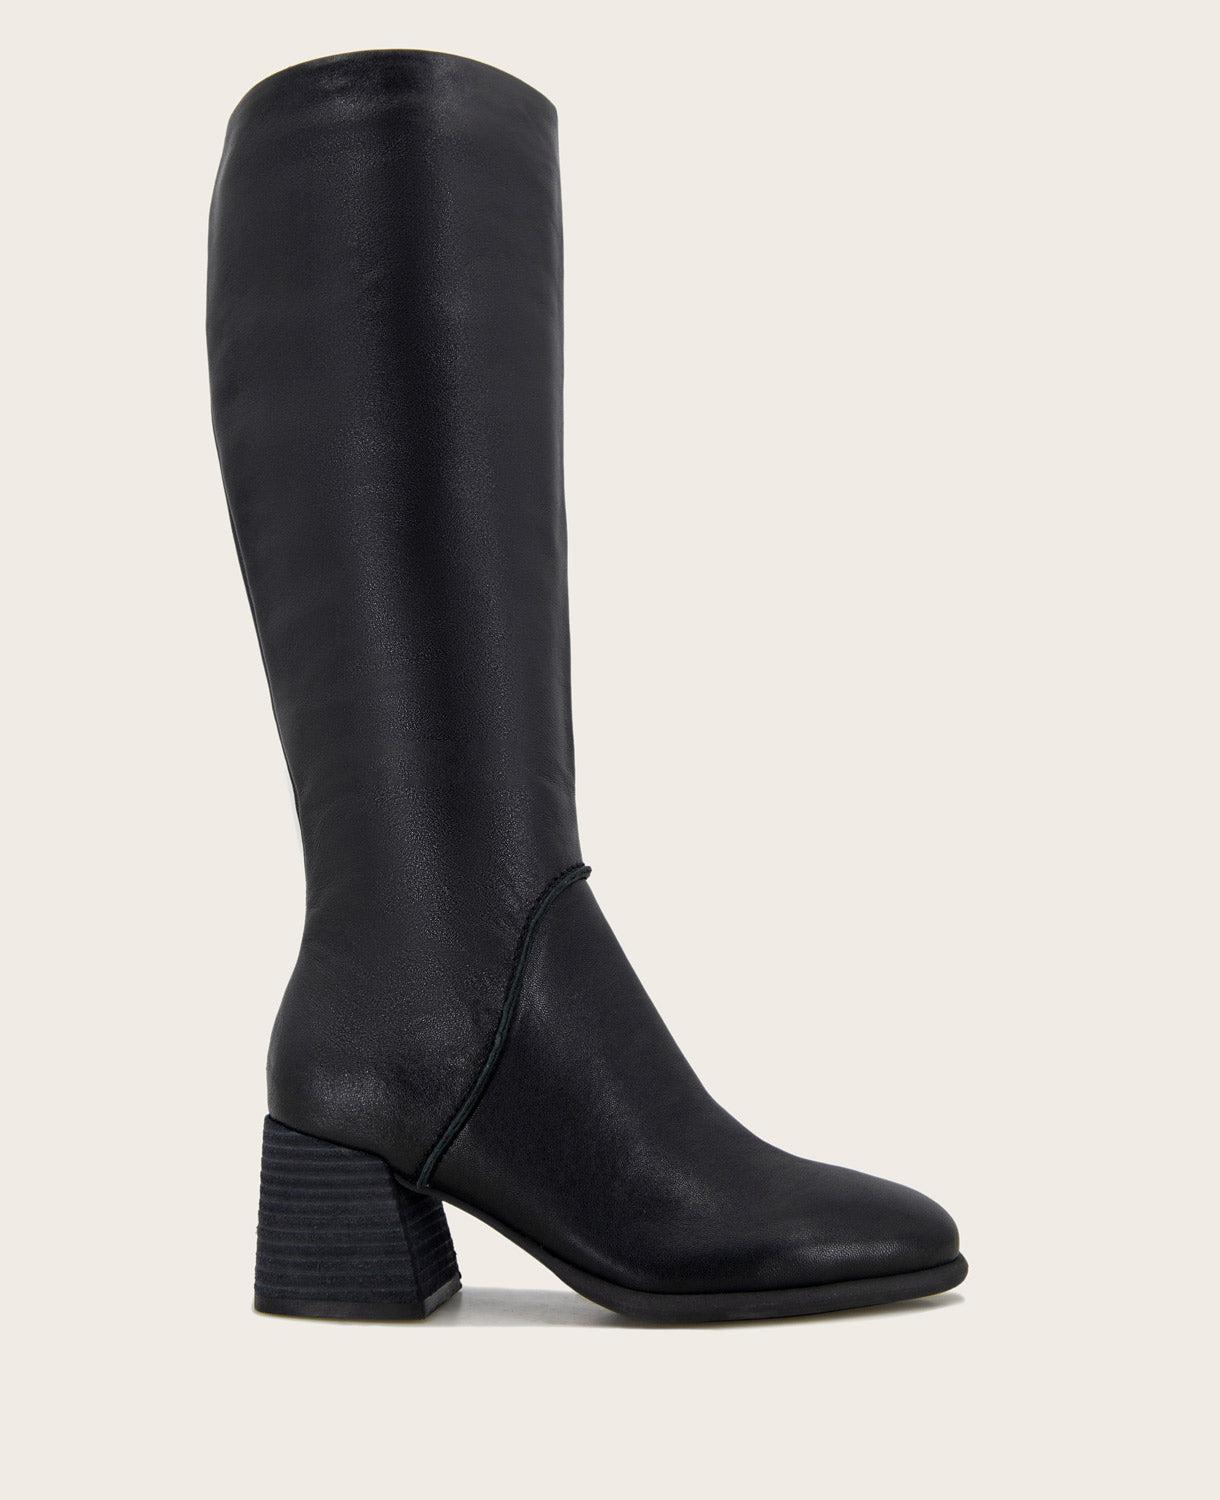 GENTLE SOULS BY KENNETH COLE Sacha Knee High Boot Product Image